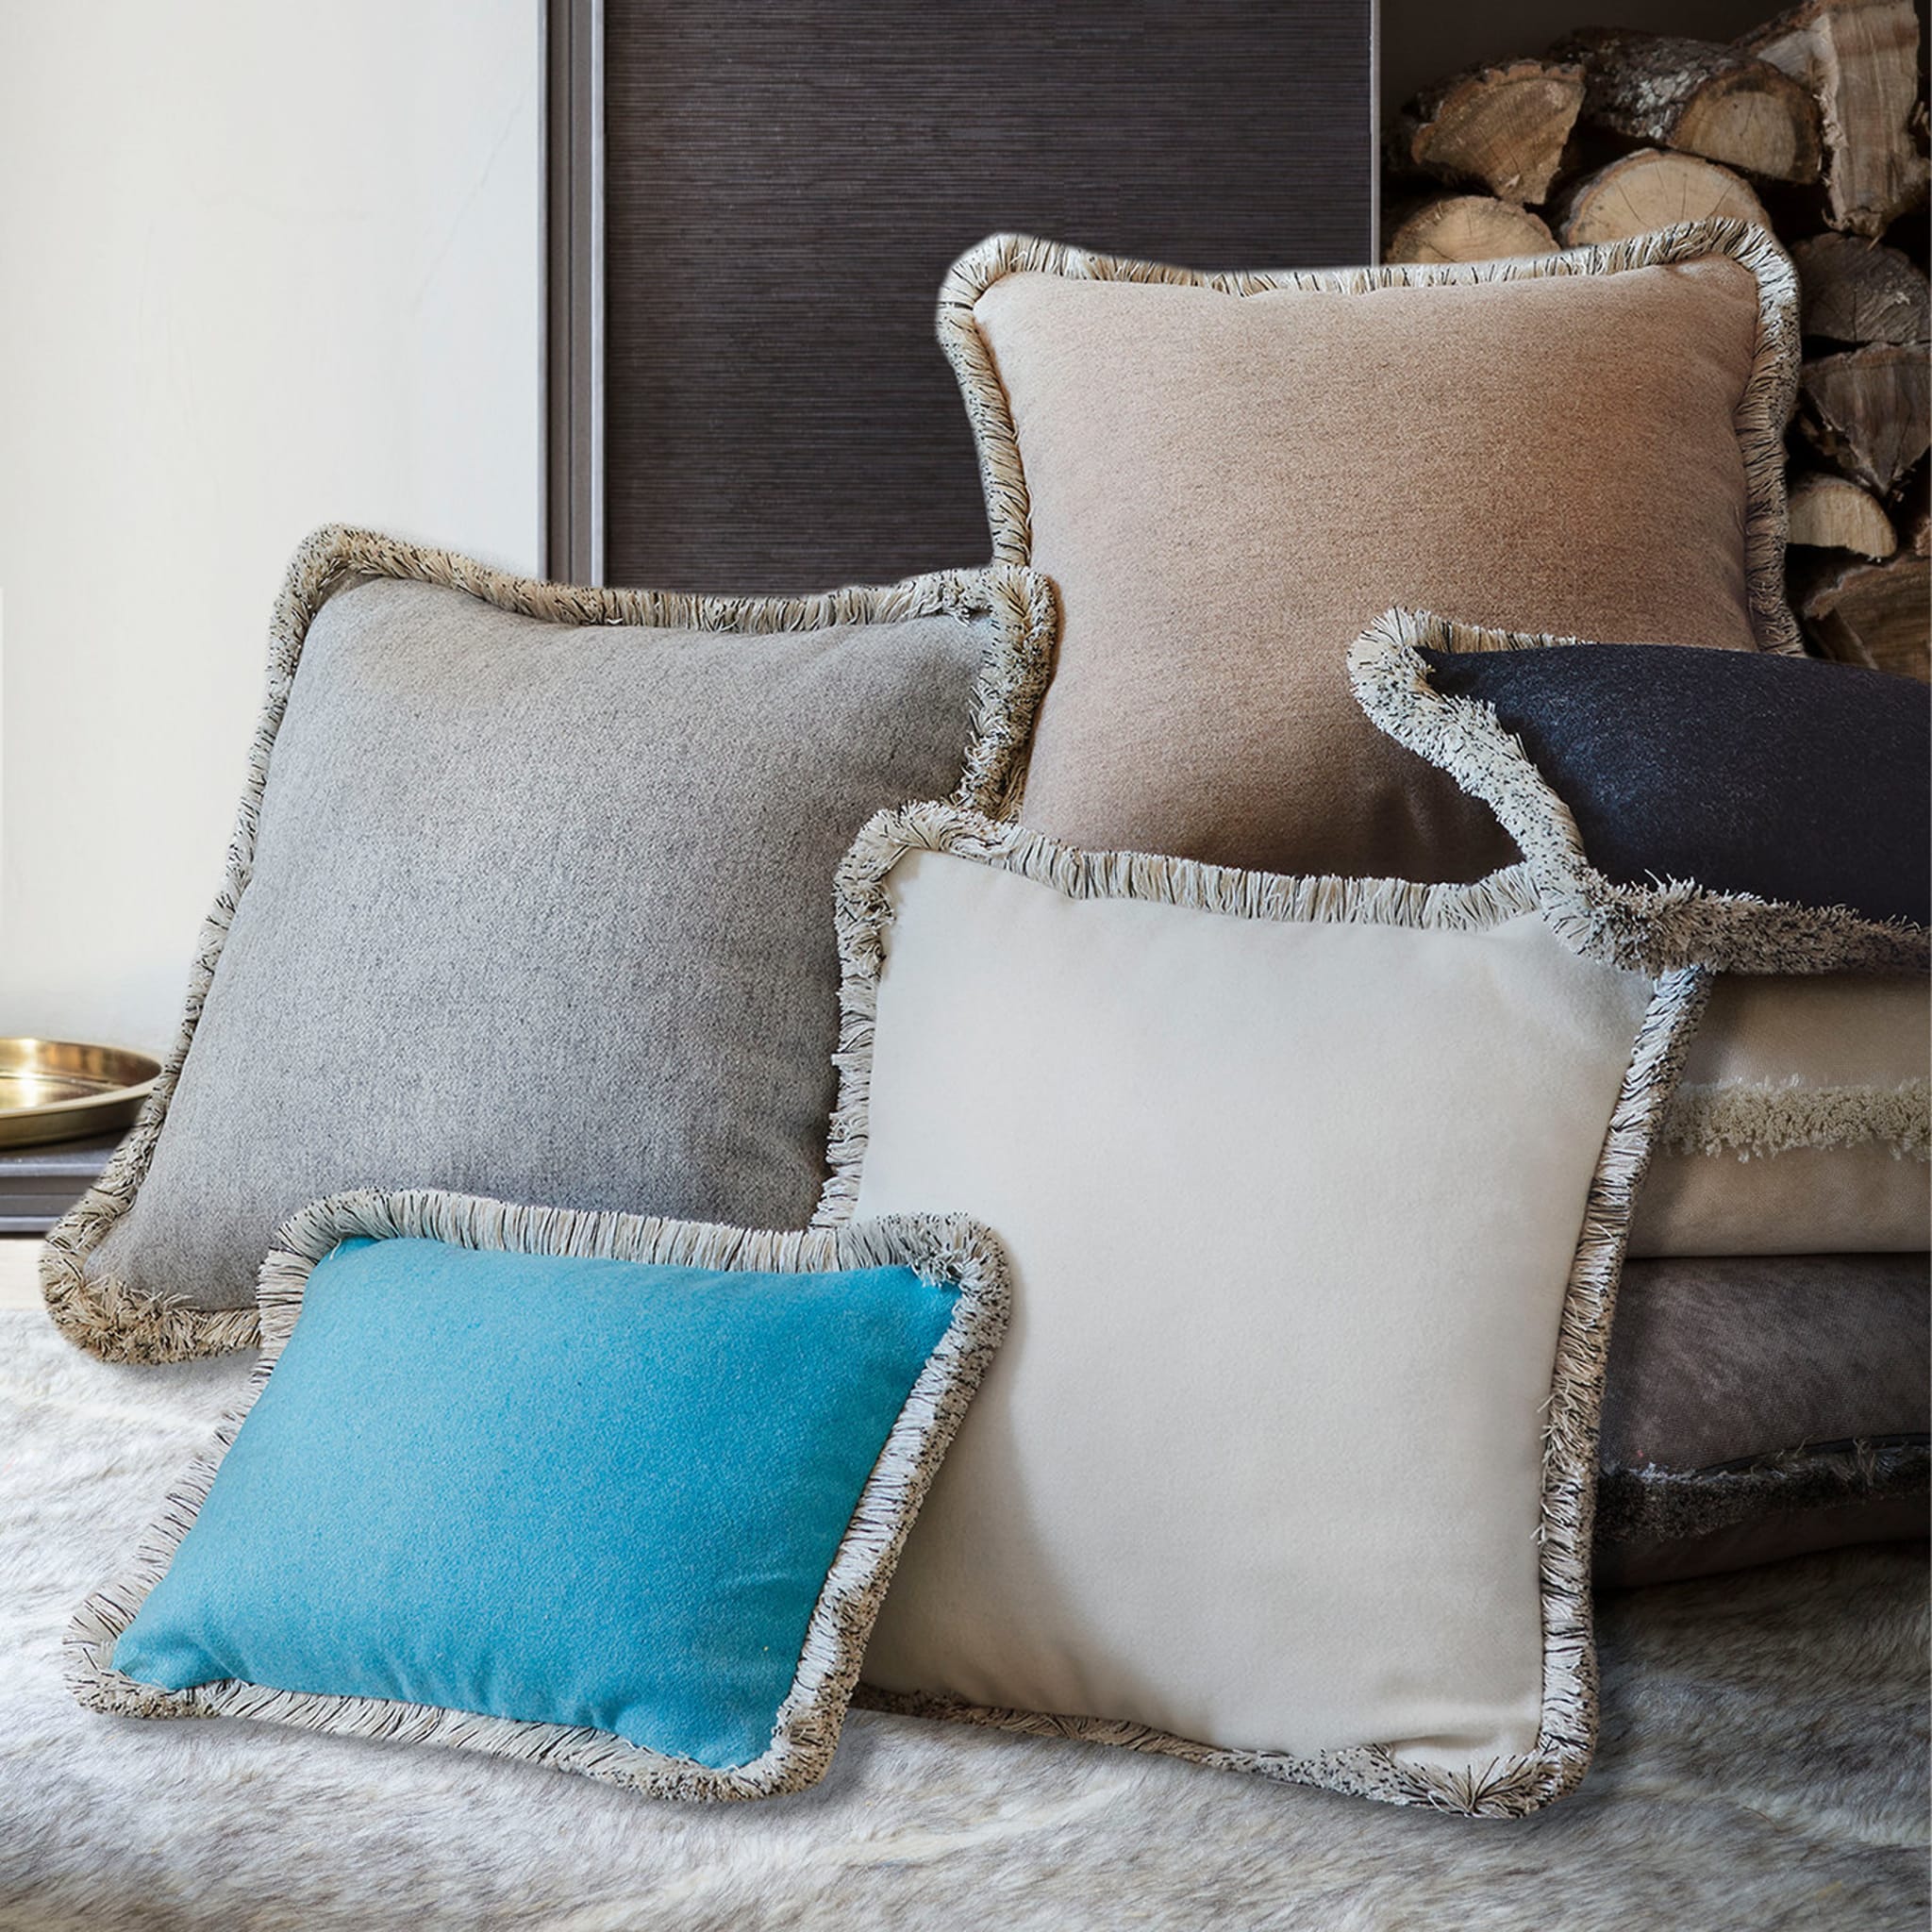 Artic Beige Square Cushion Limited Edition  - Alternative view 1